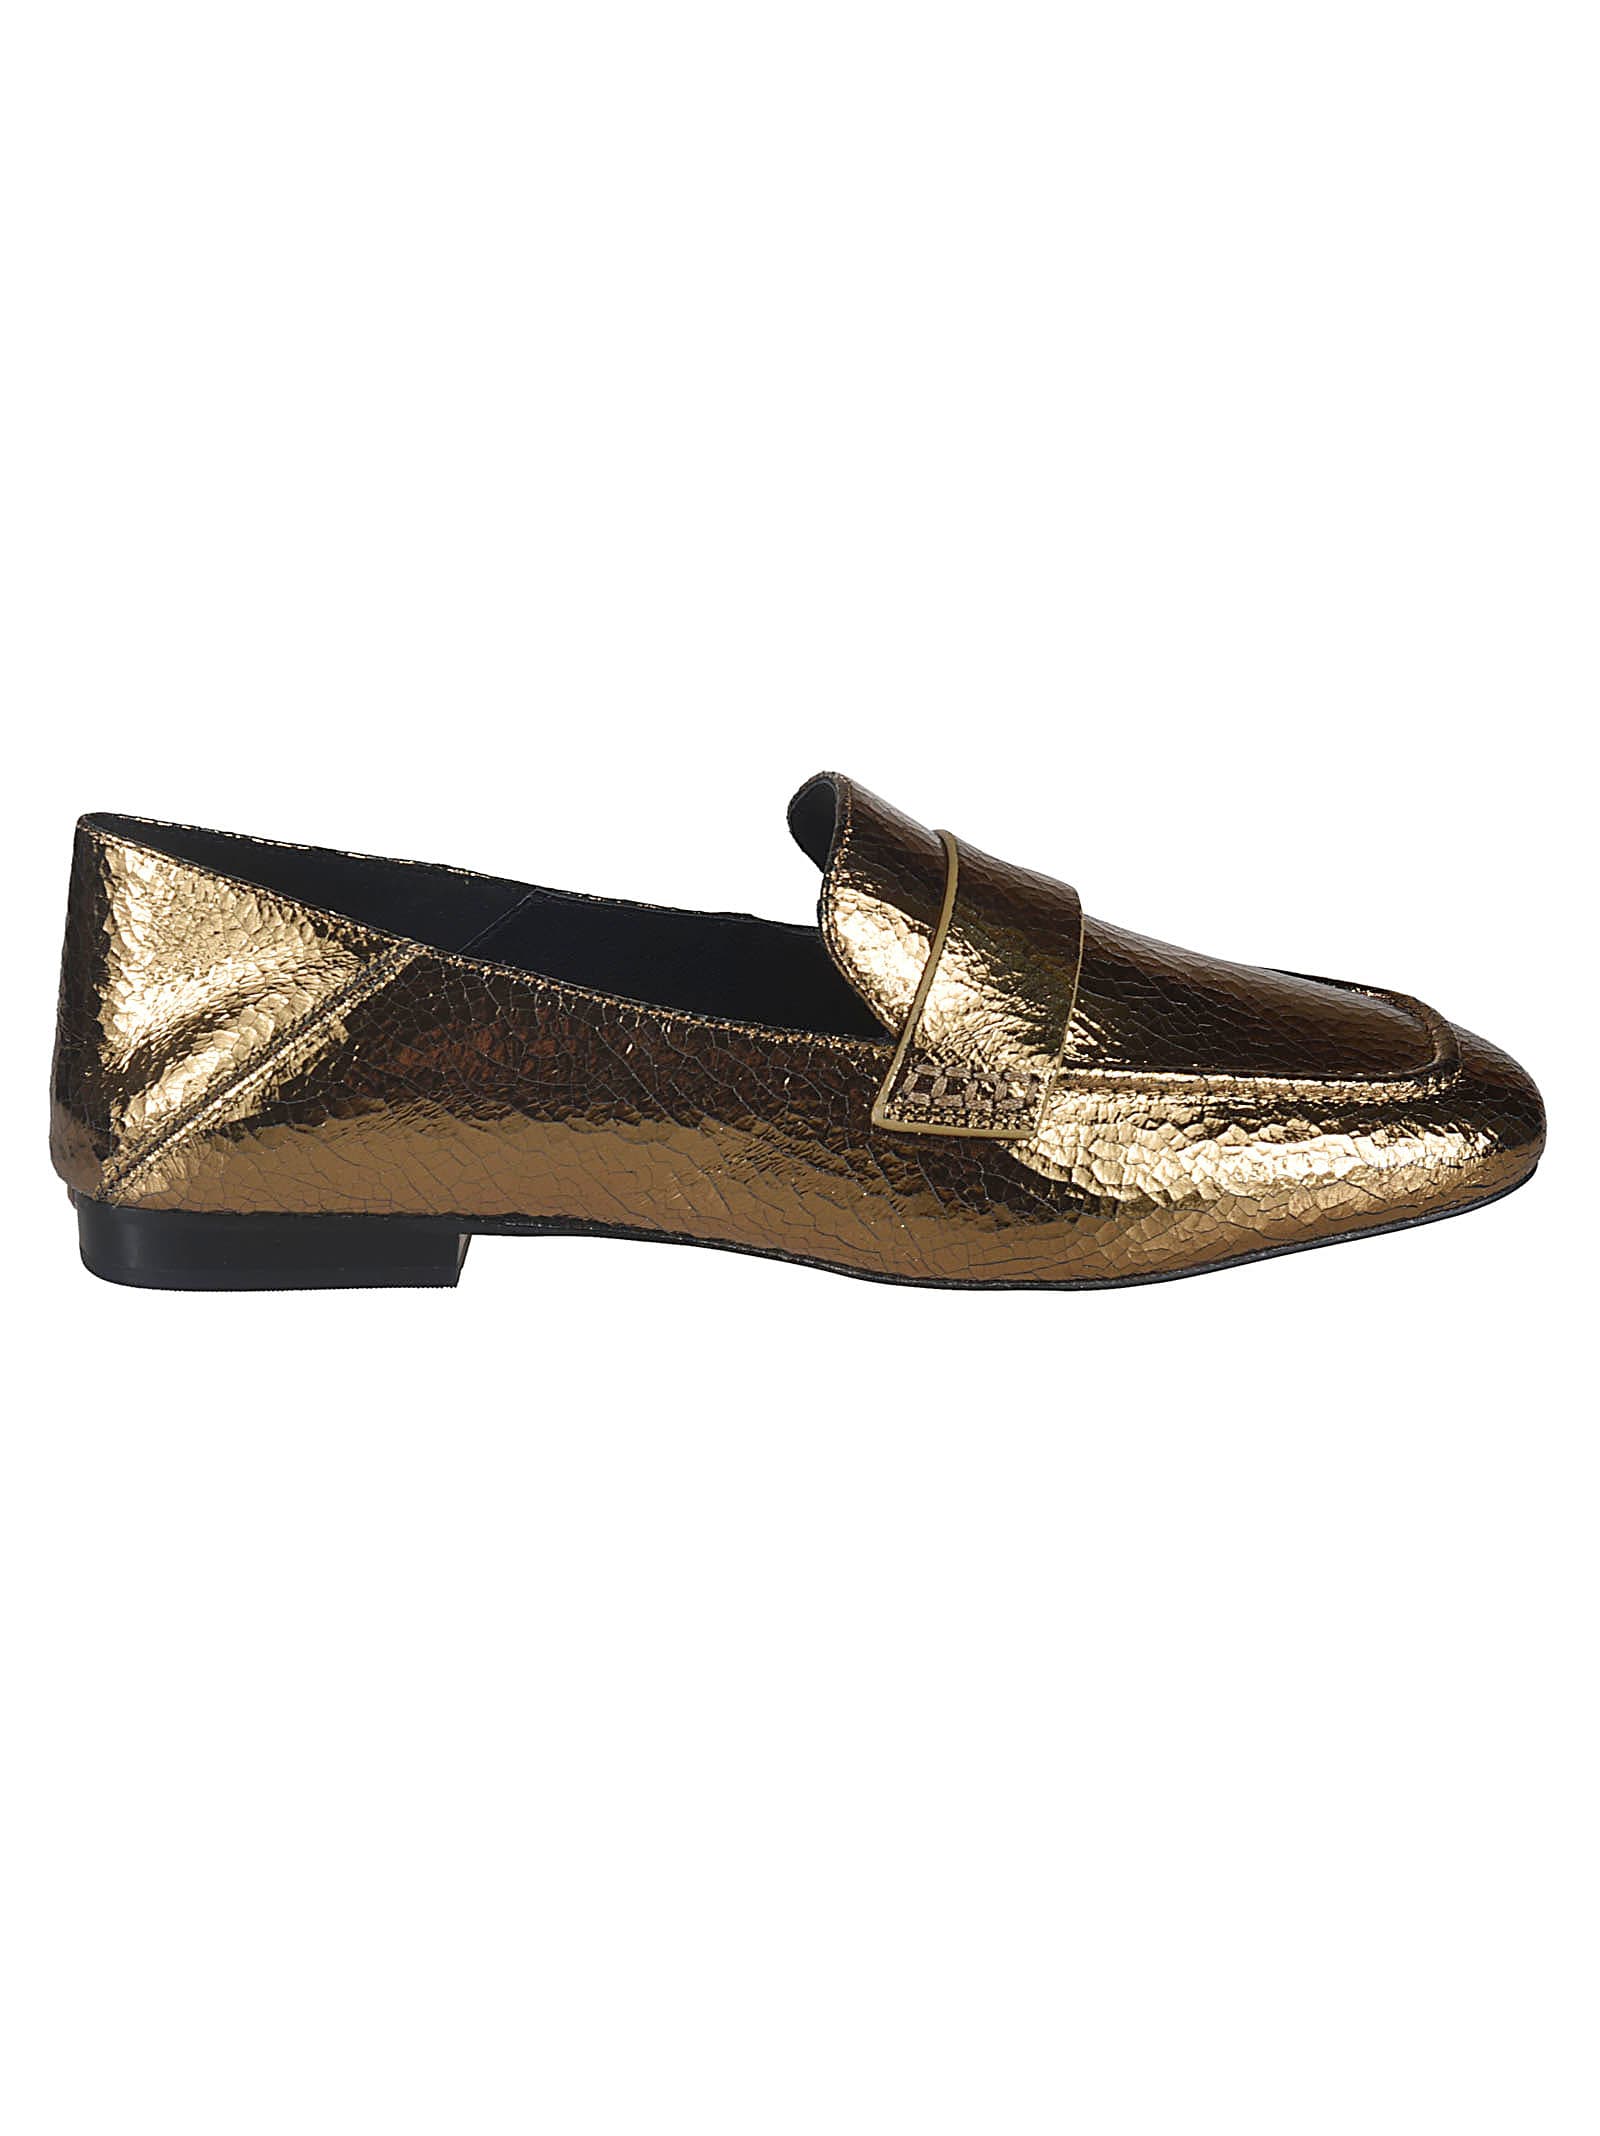 Buy Michael Kors Metallic Loafers online, shop Michael Kors shoes with free shipping